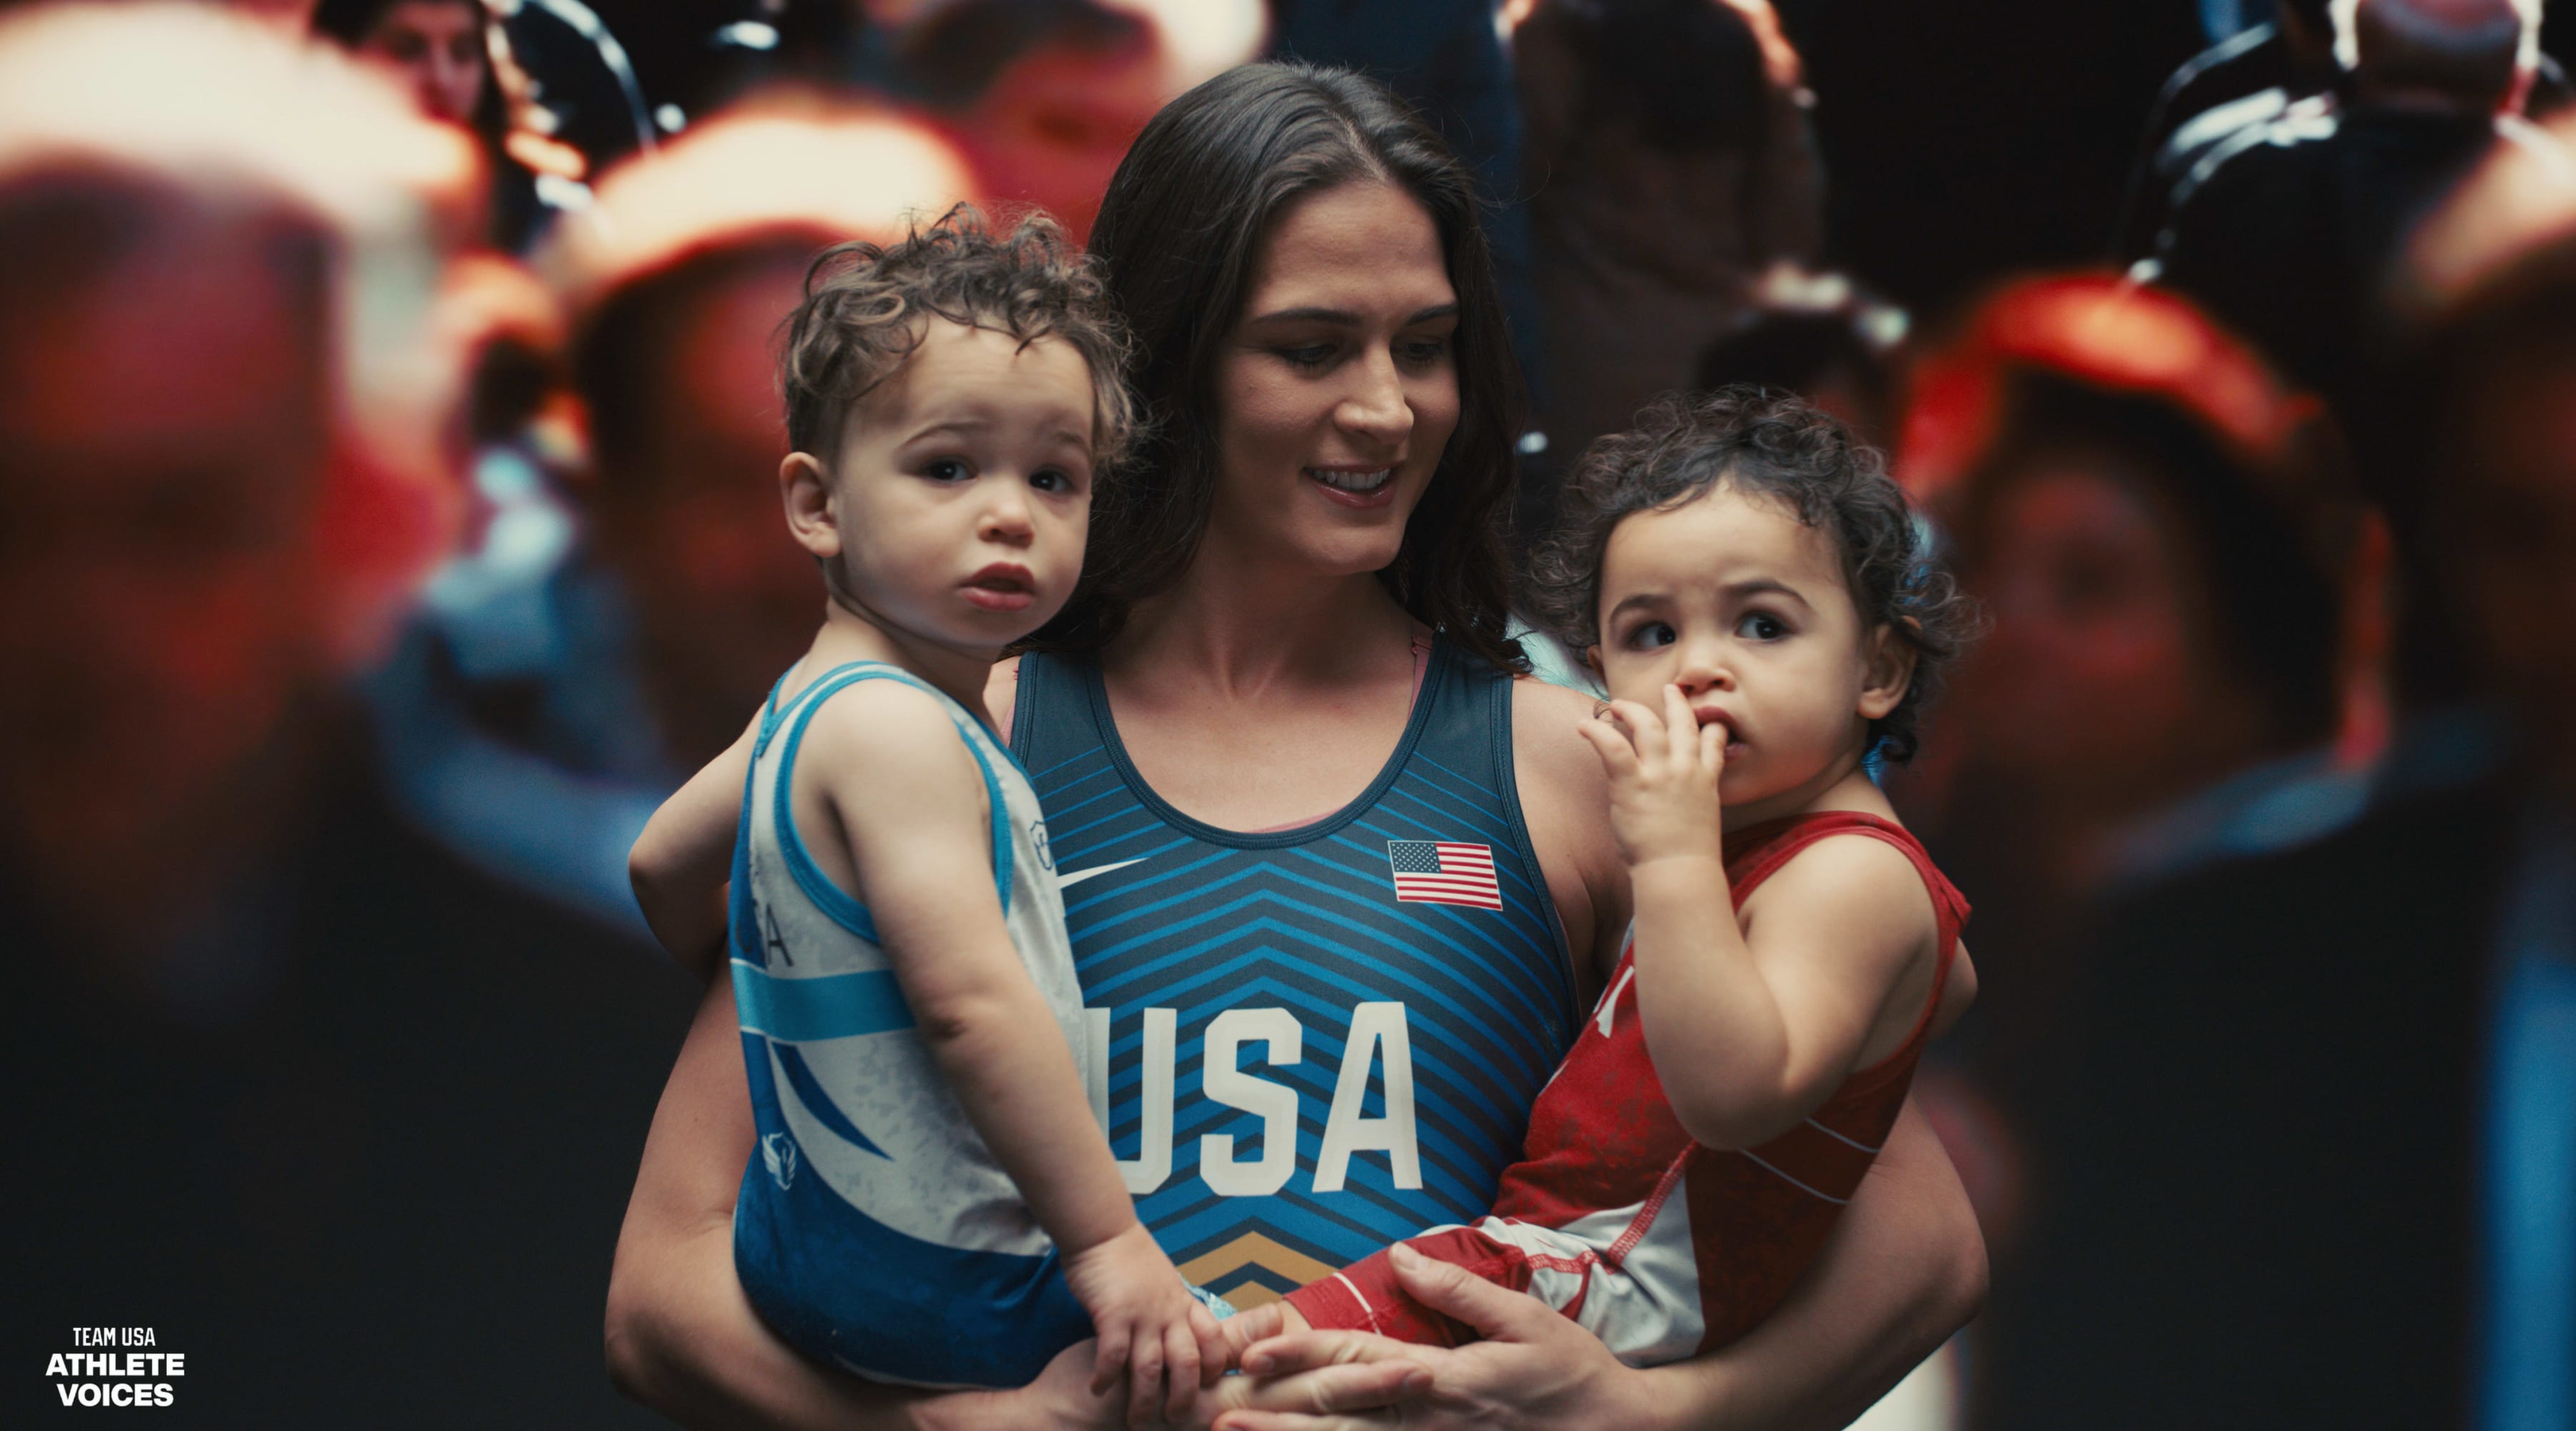 Adeline Gray poses on set with her twins at a shoot for Team USA in Los Angeles, California.